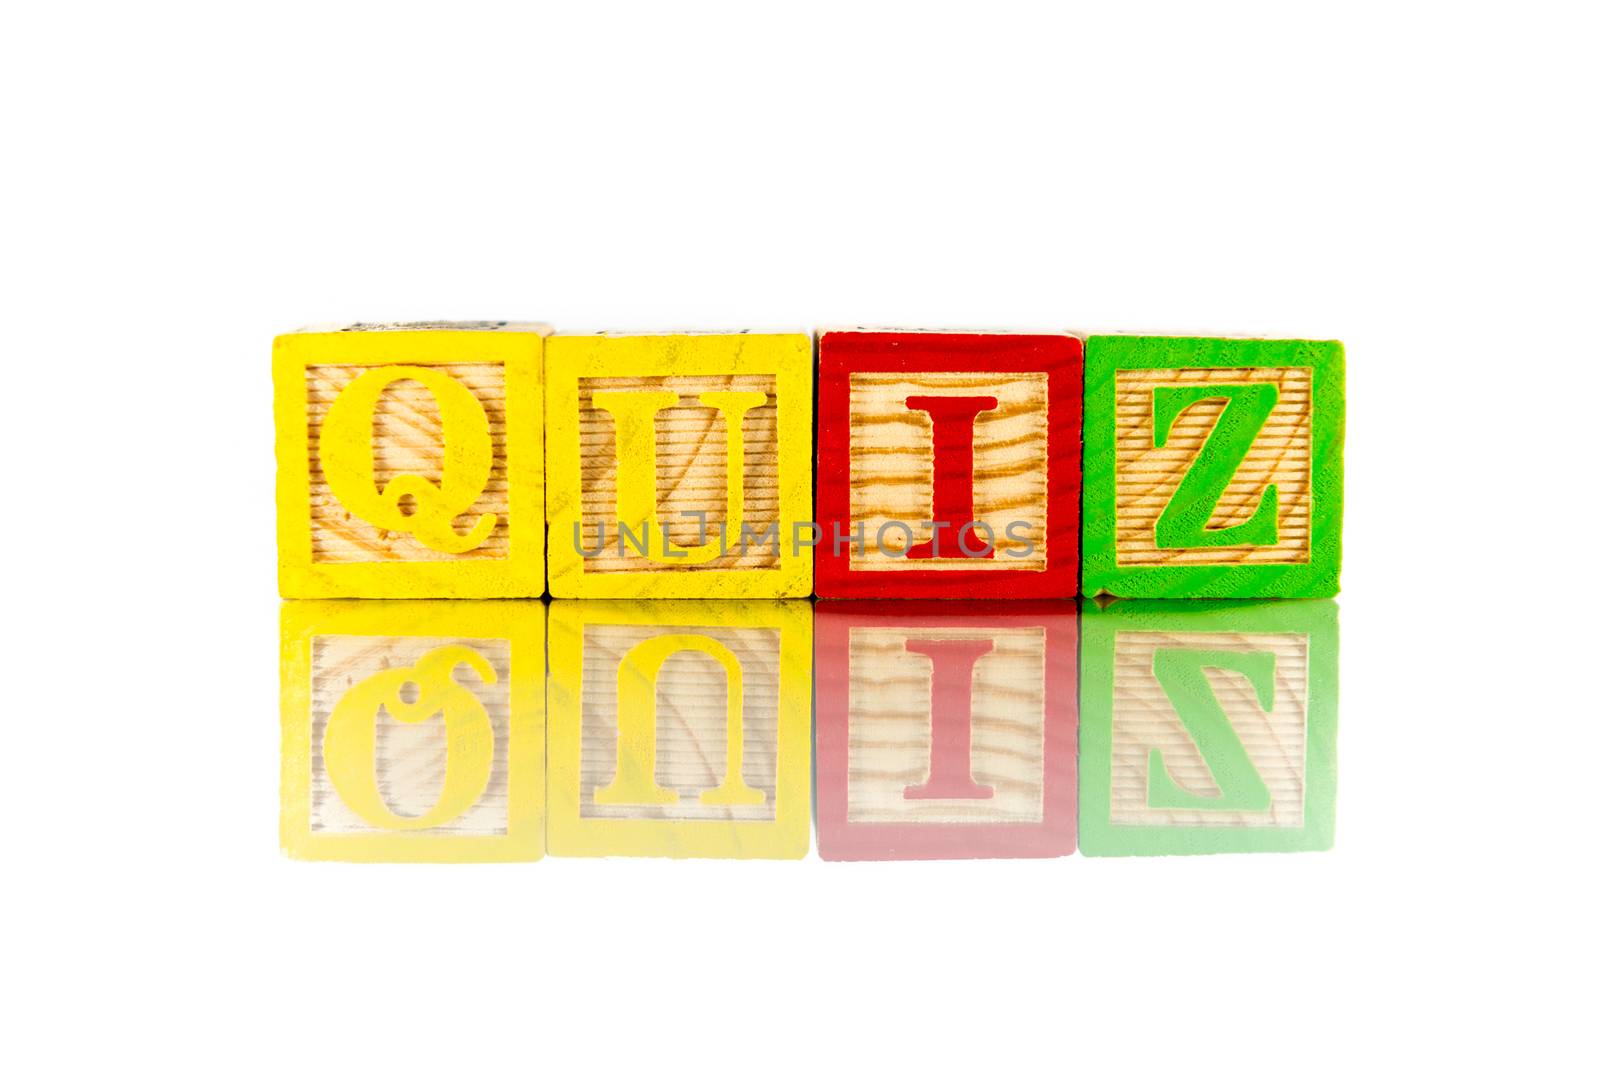 quiz colorful word on the white background